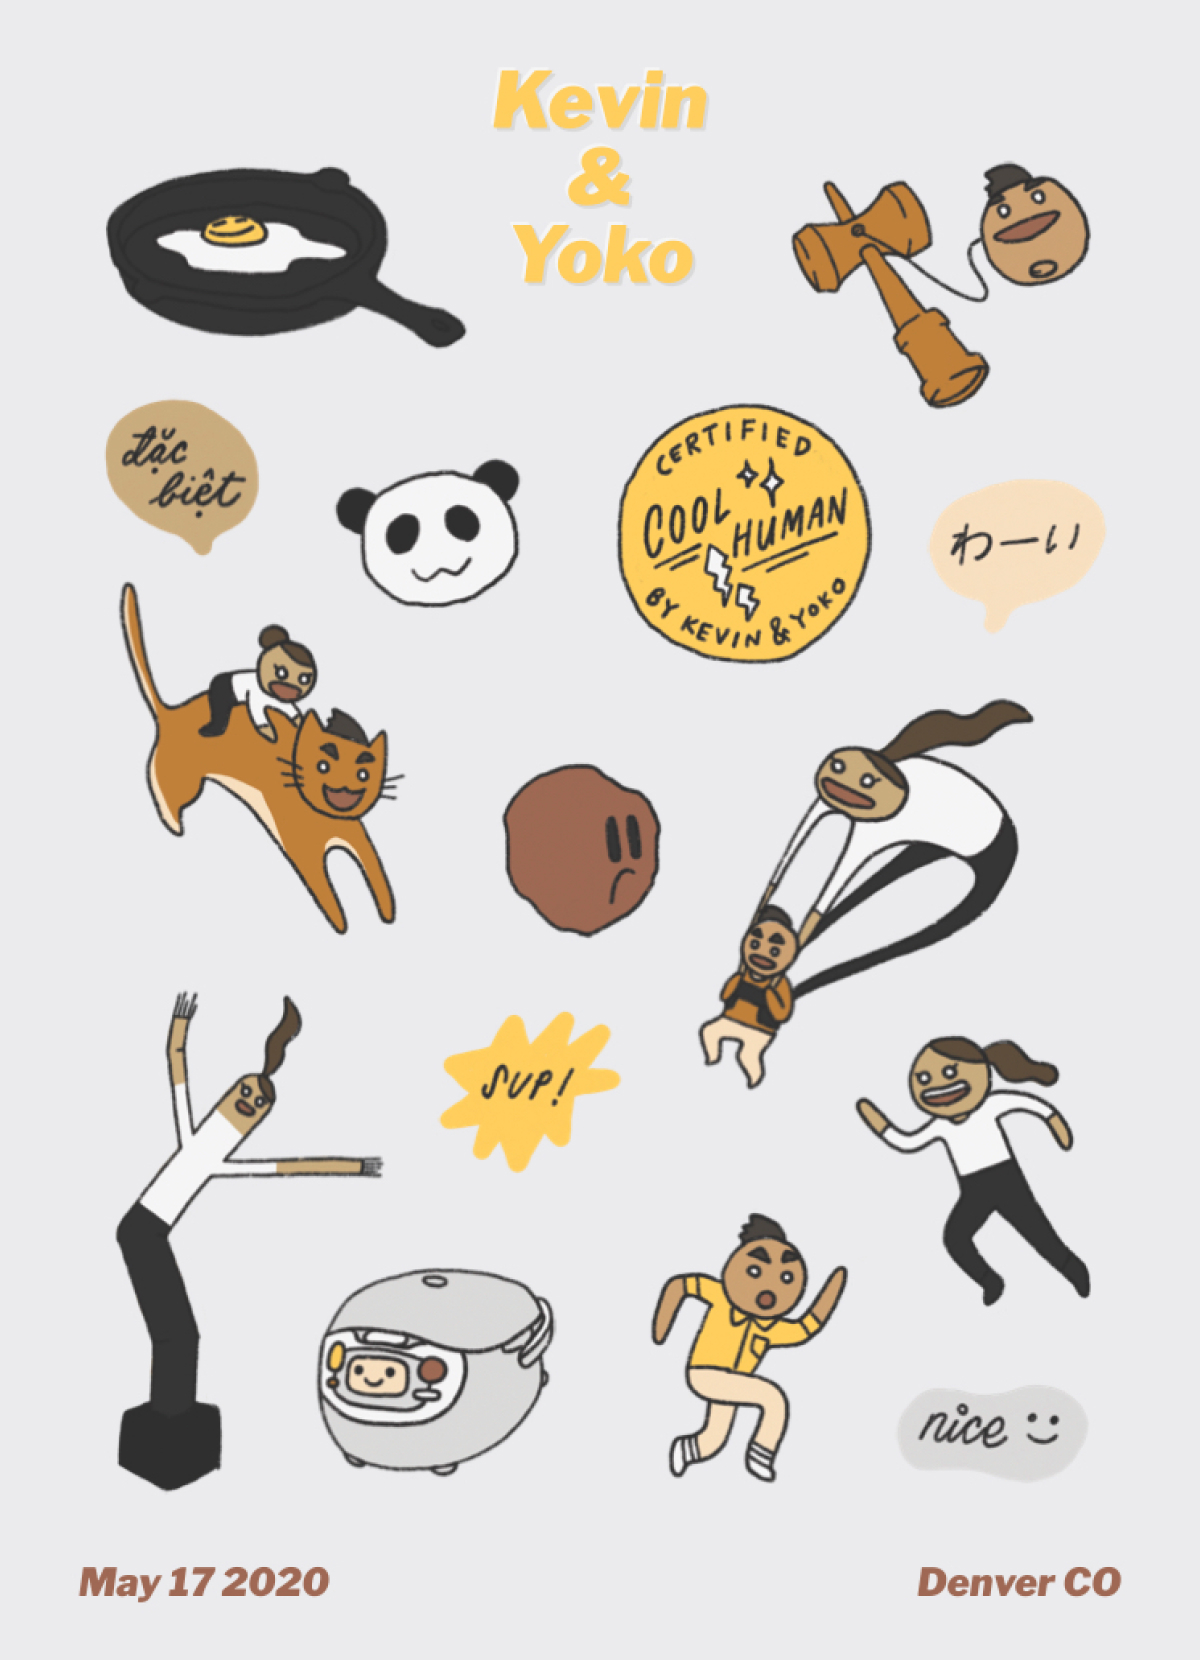 Sticker sheet! 11 drawings: A cast iron pan with a chill-looking egg in it, a kendama with Kevin’s head as the ball, a panda, a medal that says “Certified Cool Human by Kevin & Yoko”, Yoko riding an orange cat with Kevin’s face and hair, a lonely meatball, Kevin using a parachute shaped like Yoko, Yoko as an inflatable tubeperson, a VERY CUTE rice cooker, Kevin running in one direction, Yoko running in another direction. There are also stickers that say “Sup!” “Nice” “わーい (yay)” “đặc biệt (special).”